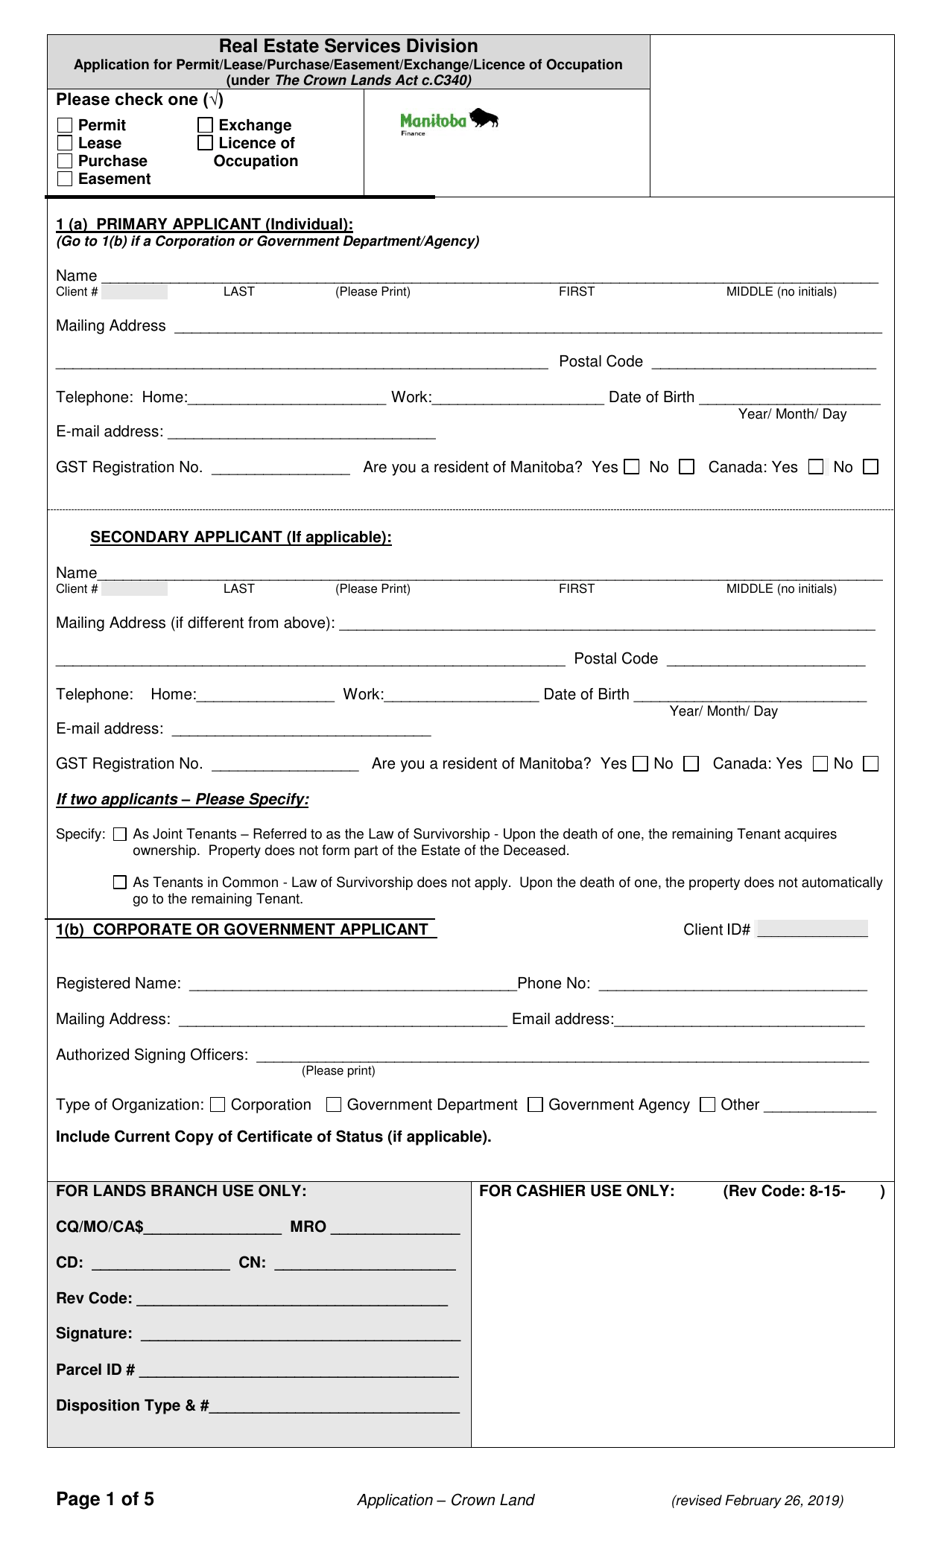 Application for Permit / Lease / Purchase / Easement / Exchange / Licence of Occupation - Manitoba, Canada, Page 1